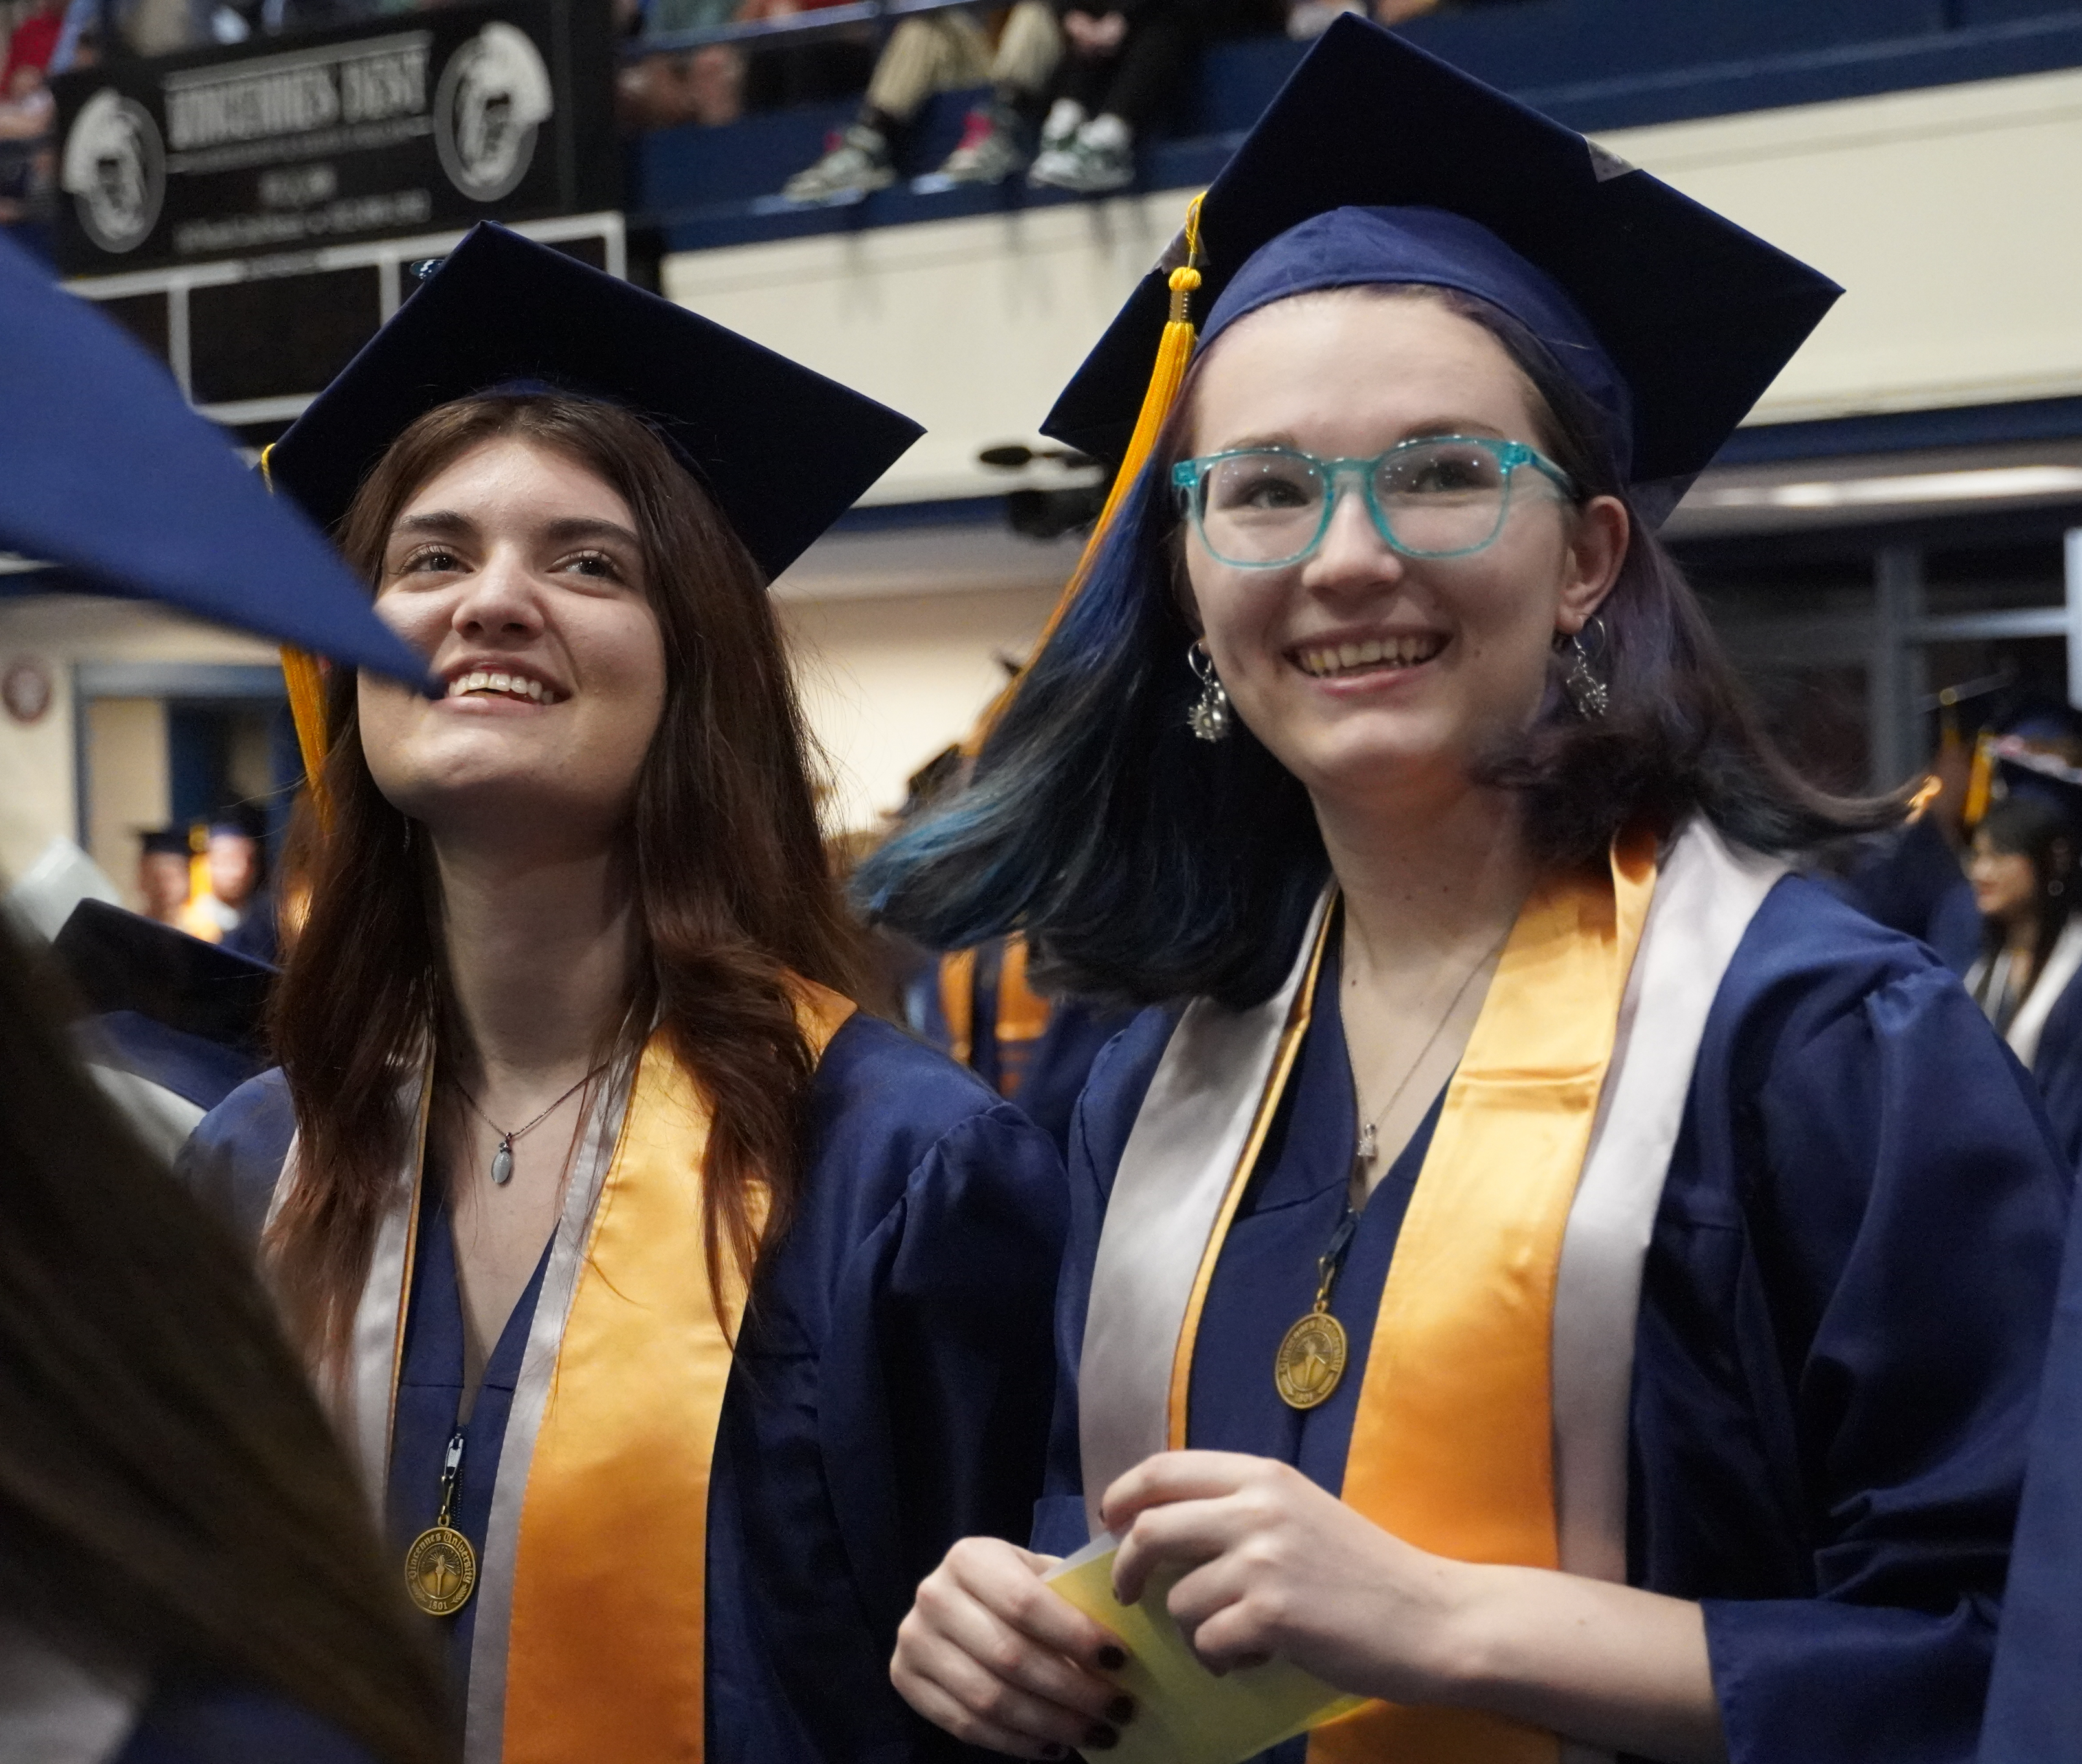 2 smiling female VU graduates wearing caps and gown. One is wearing glasses and has brightly colored hair.